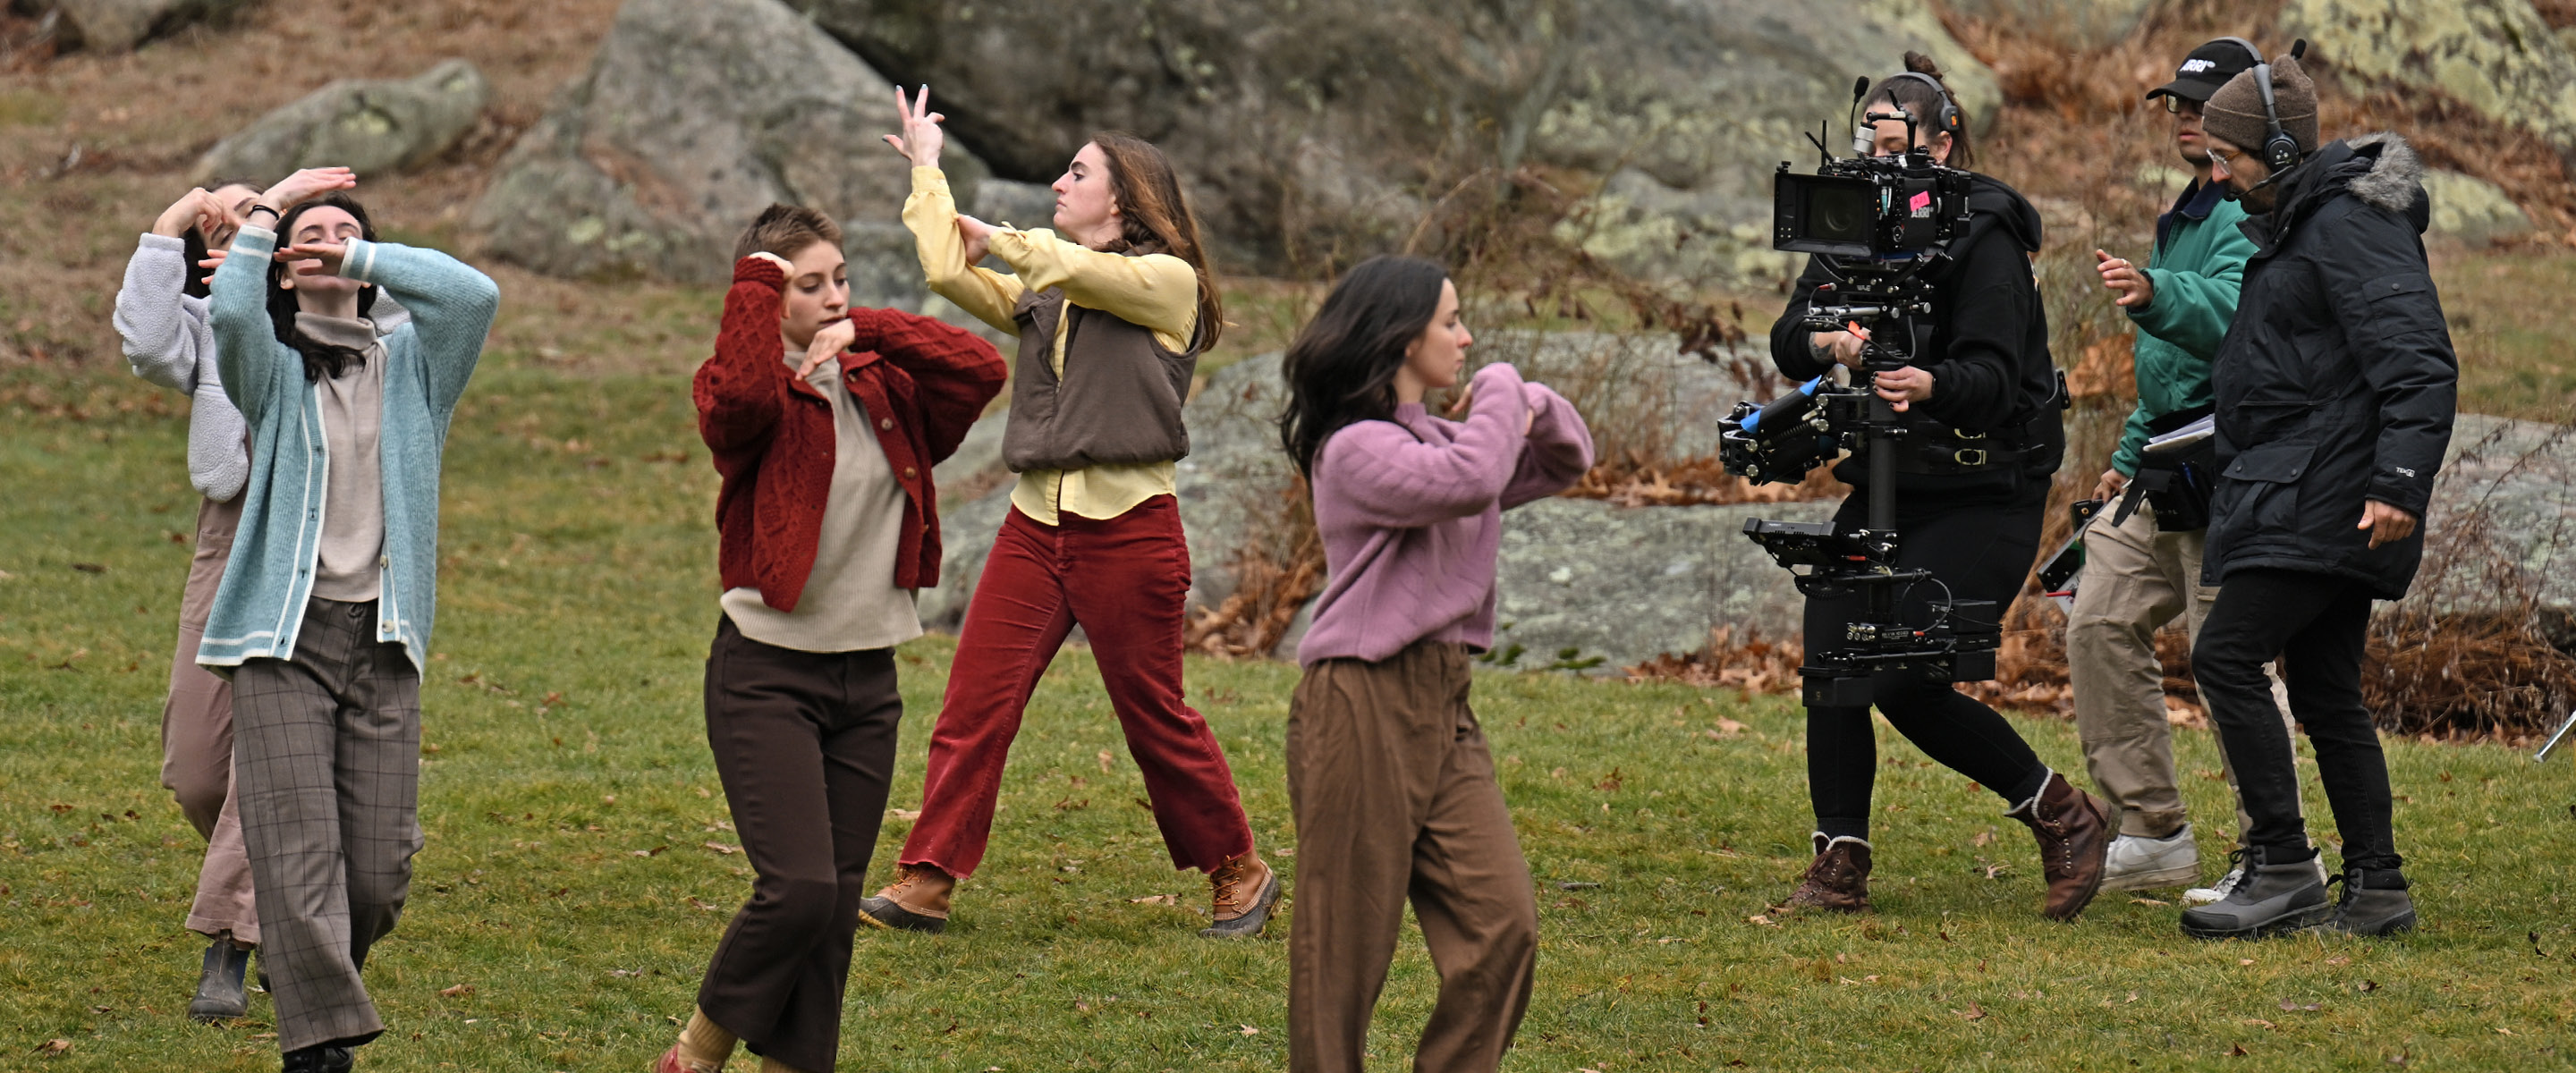 Dance students perform for the camera in the Connecticut College Arboretum.